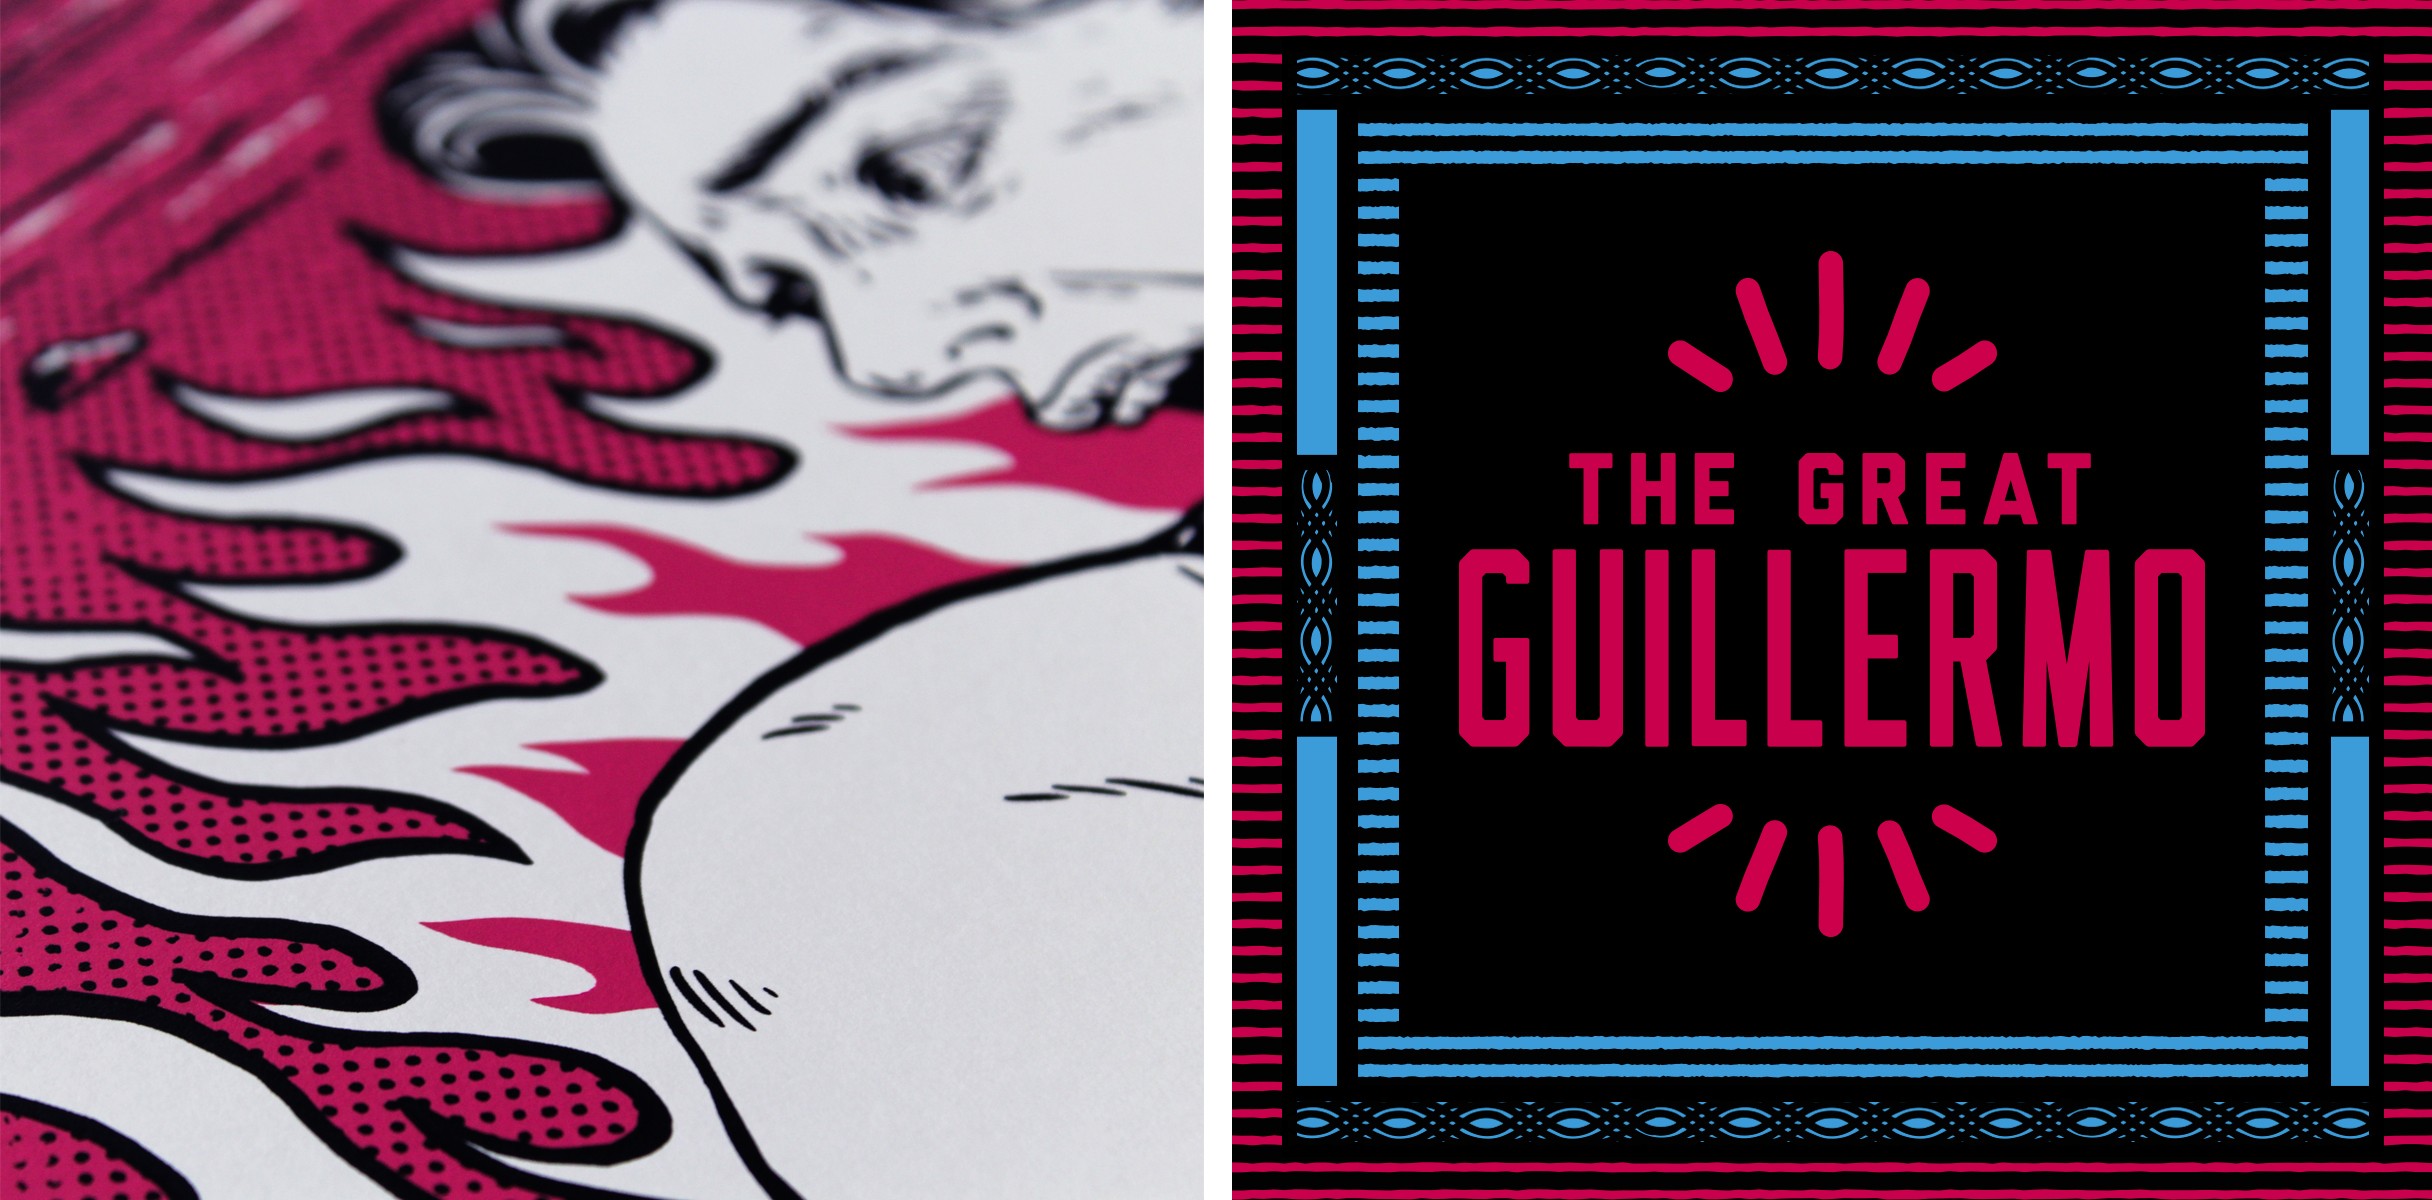 The Great Guillermo Poster and close up of Lola Beltran's screen print